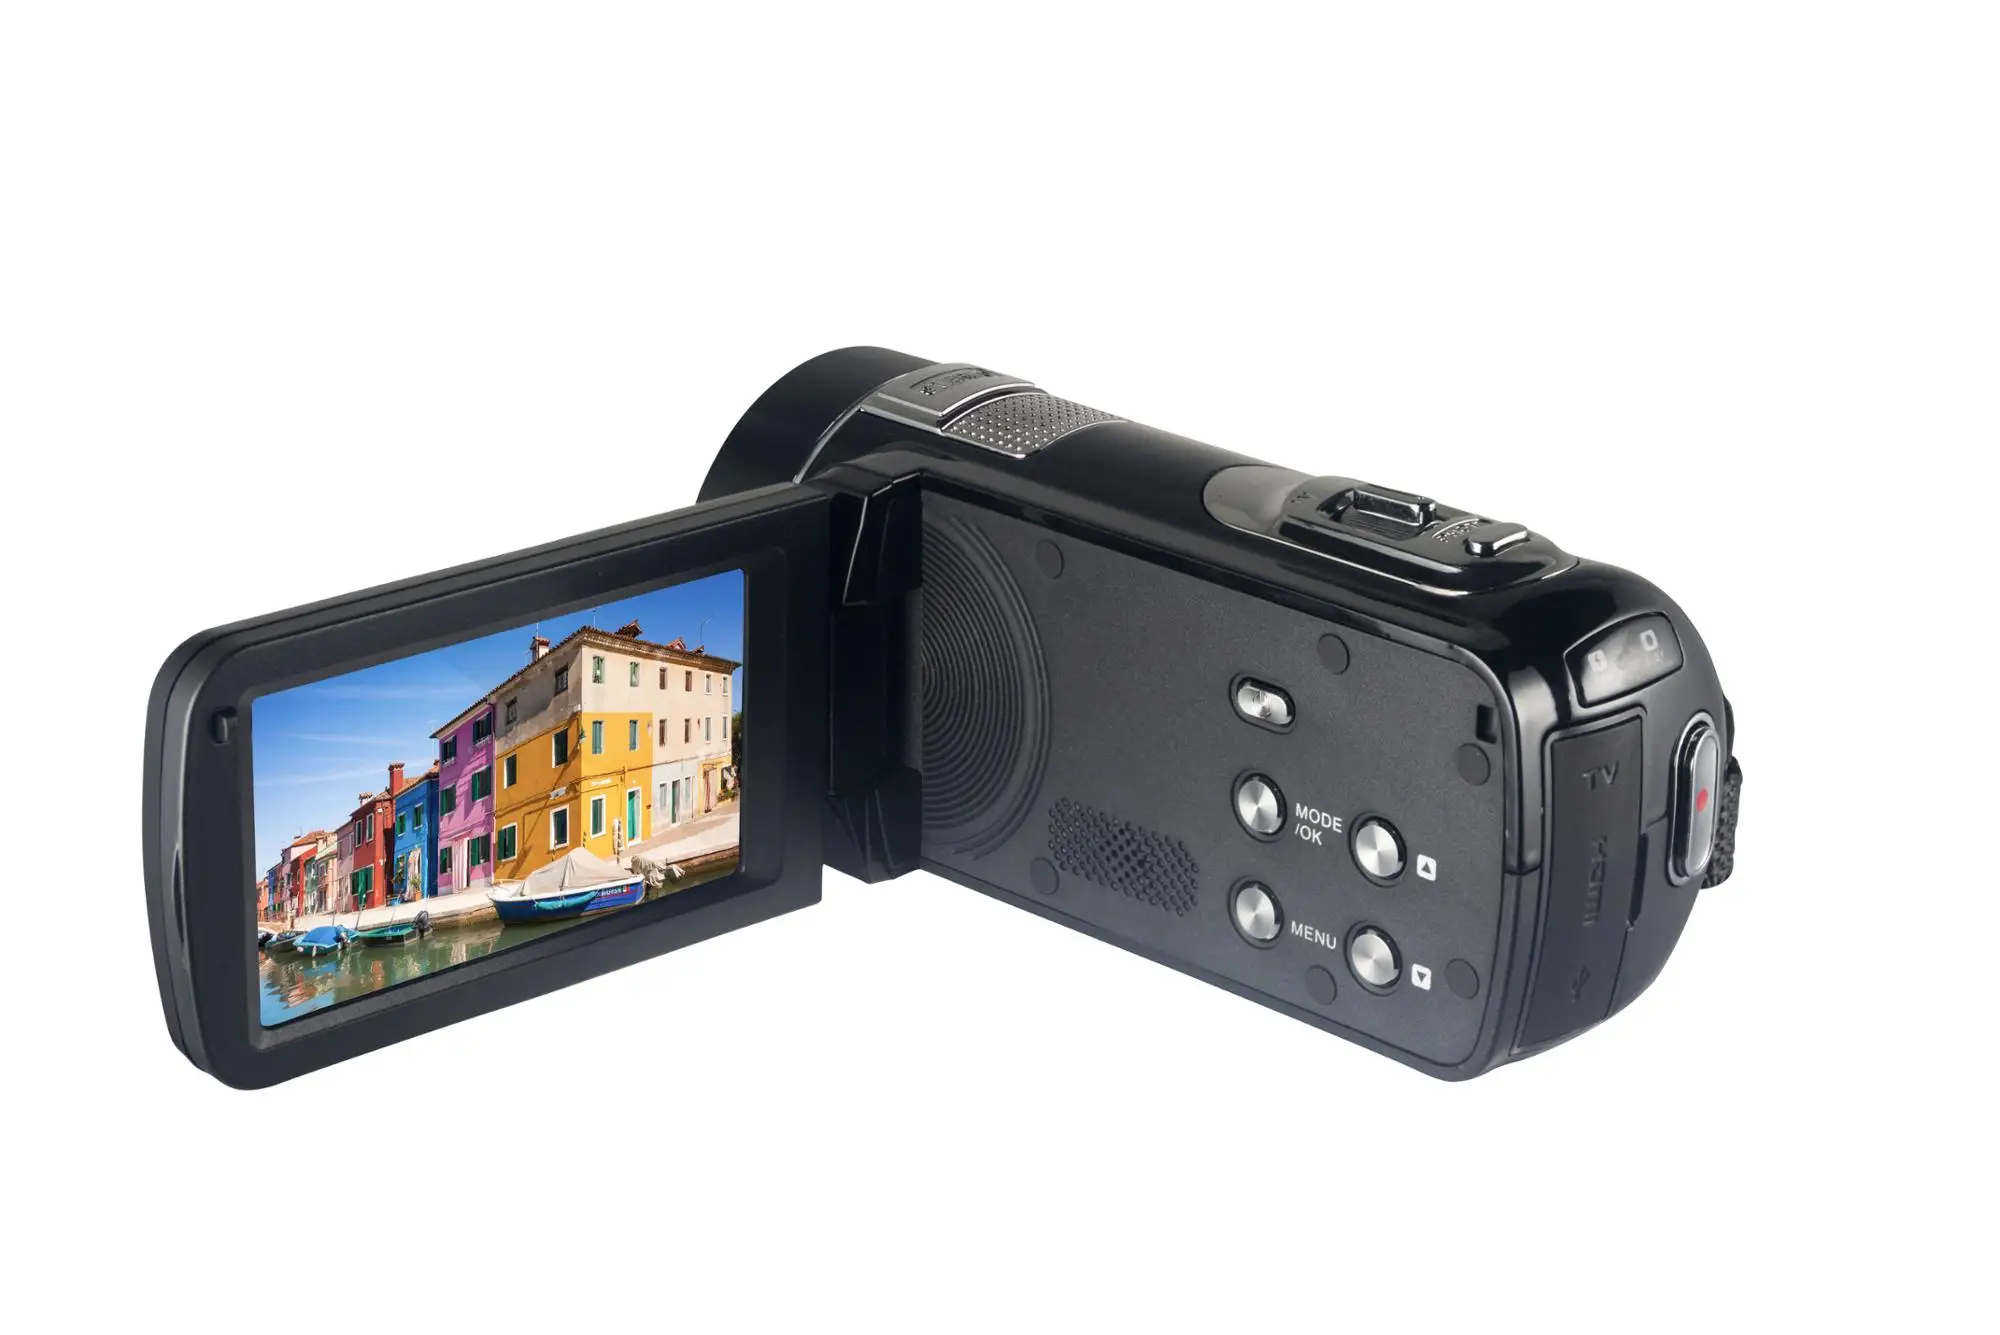 Super 24mp FHD 1080p Professional Digital Video Camera With 3.0"Touch Display